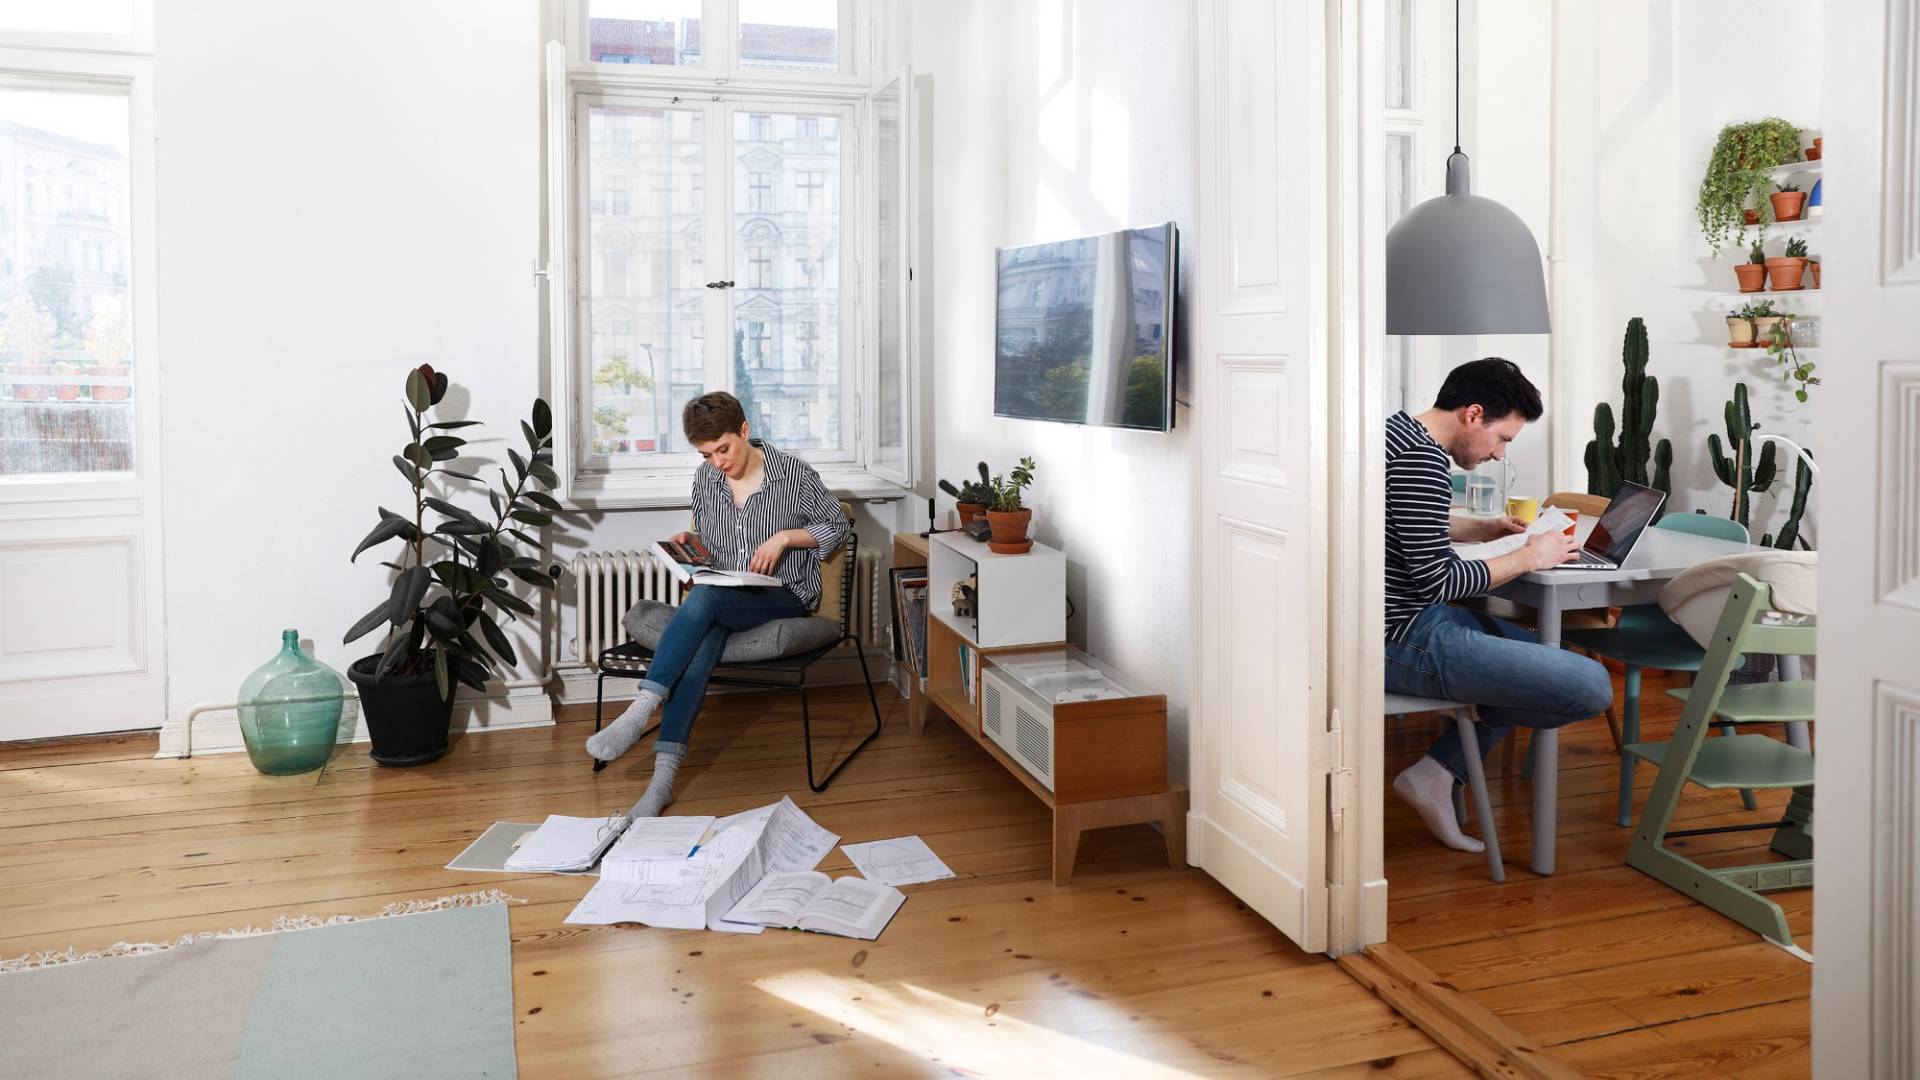 Two people sit in an apartment and deal with documents.